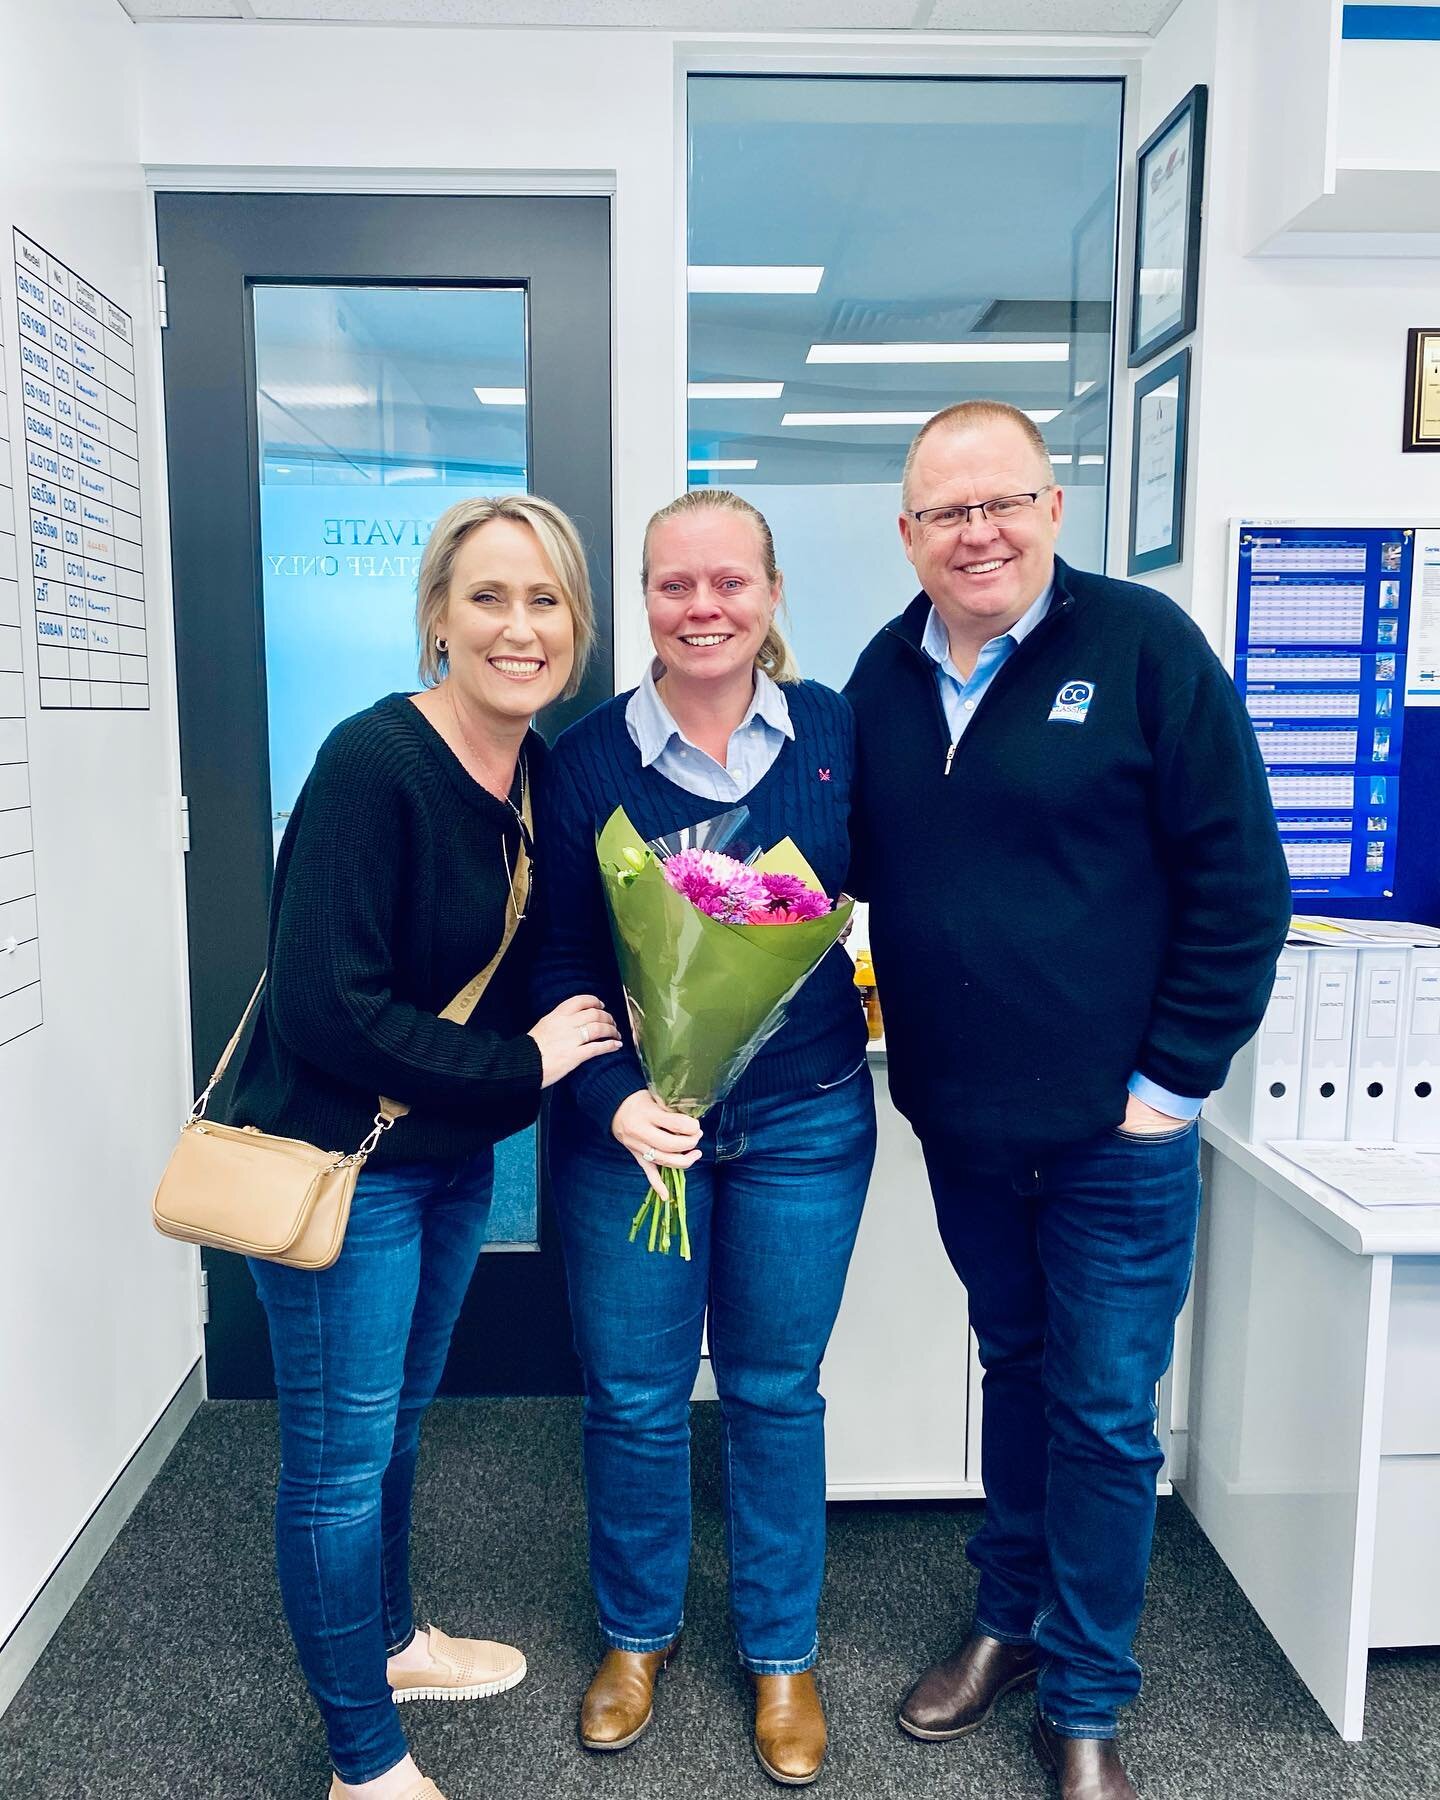 Yesterday we bid farewell to Eleanor, our Finance Manager for the past 7 years. It was a bitter sweet day with lots of tears. We are thrilled for her next chapter in her new role but sad to see a loyal, hardworking and professional colleague leave #t